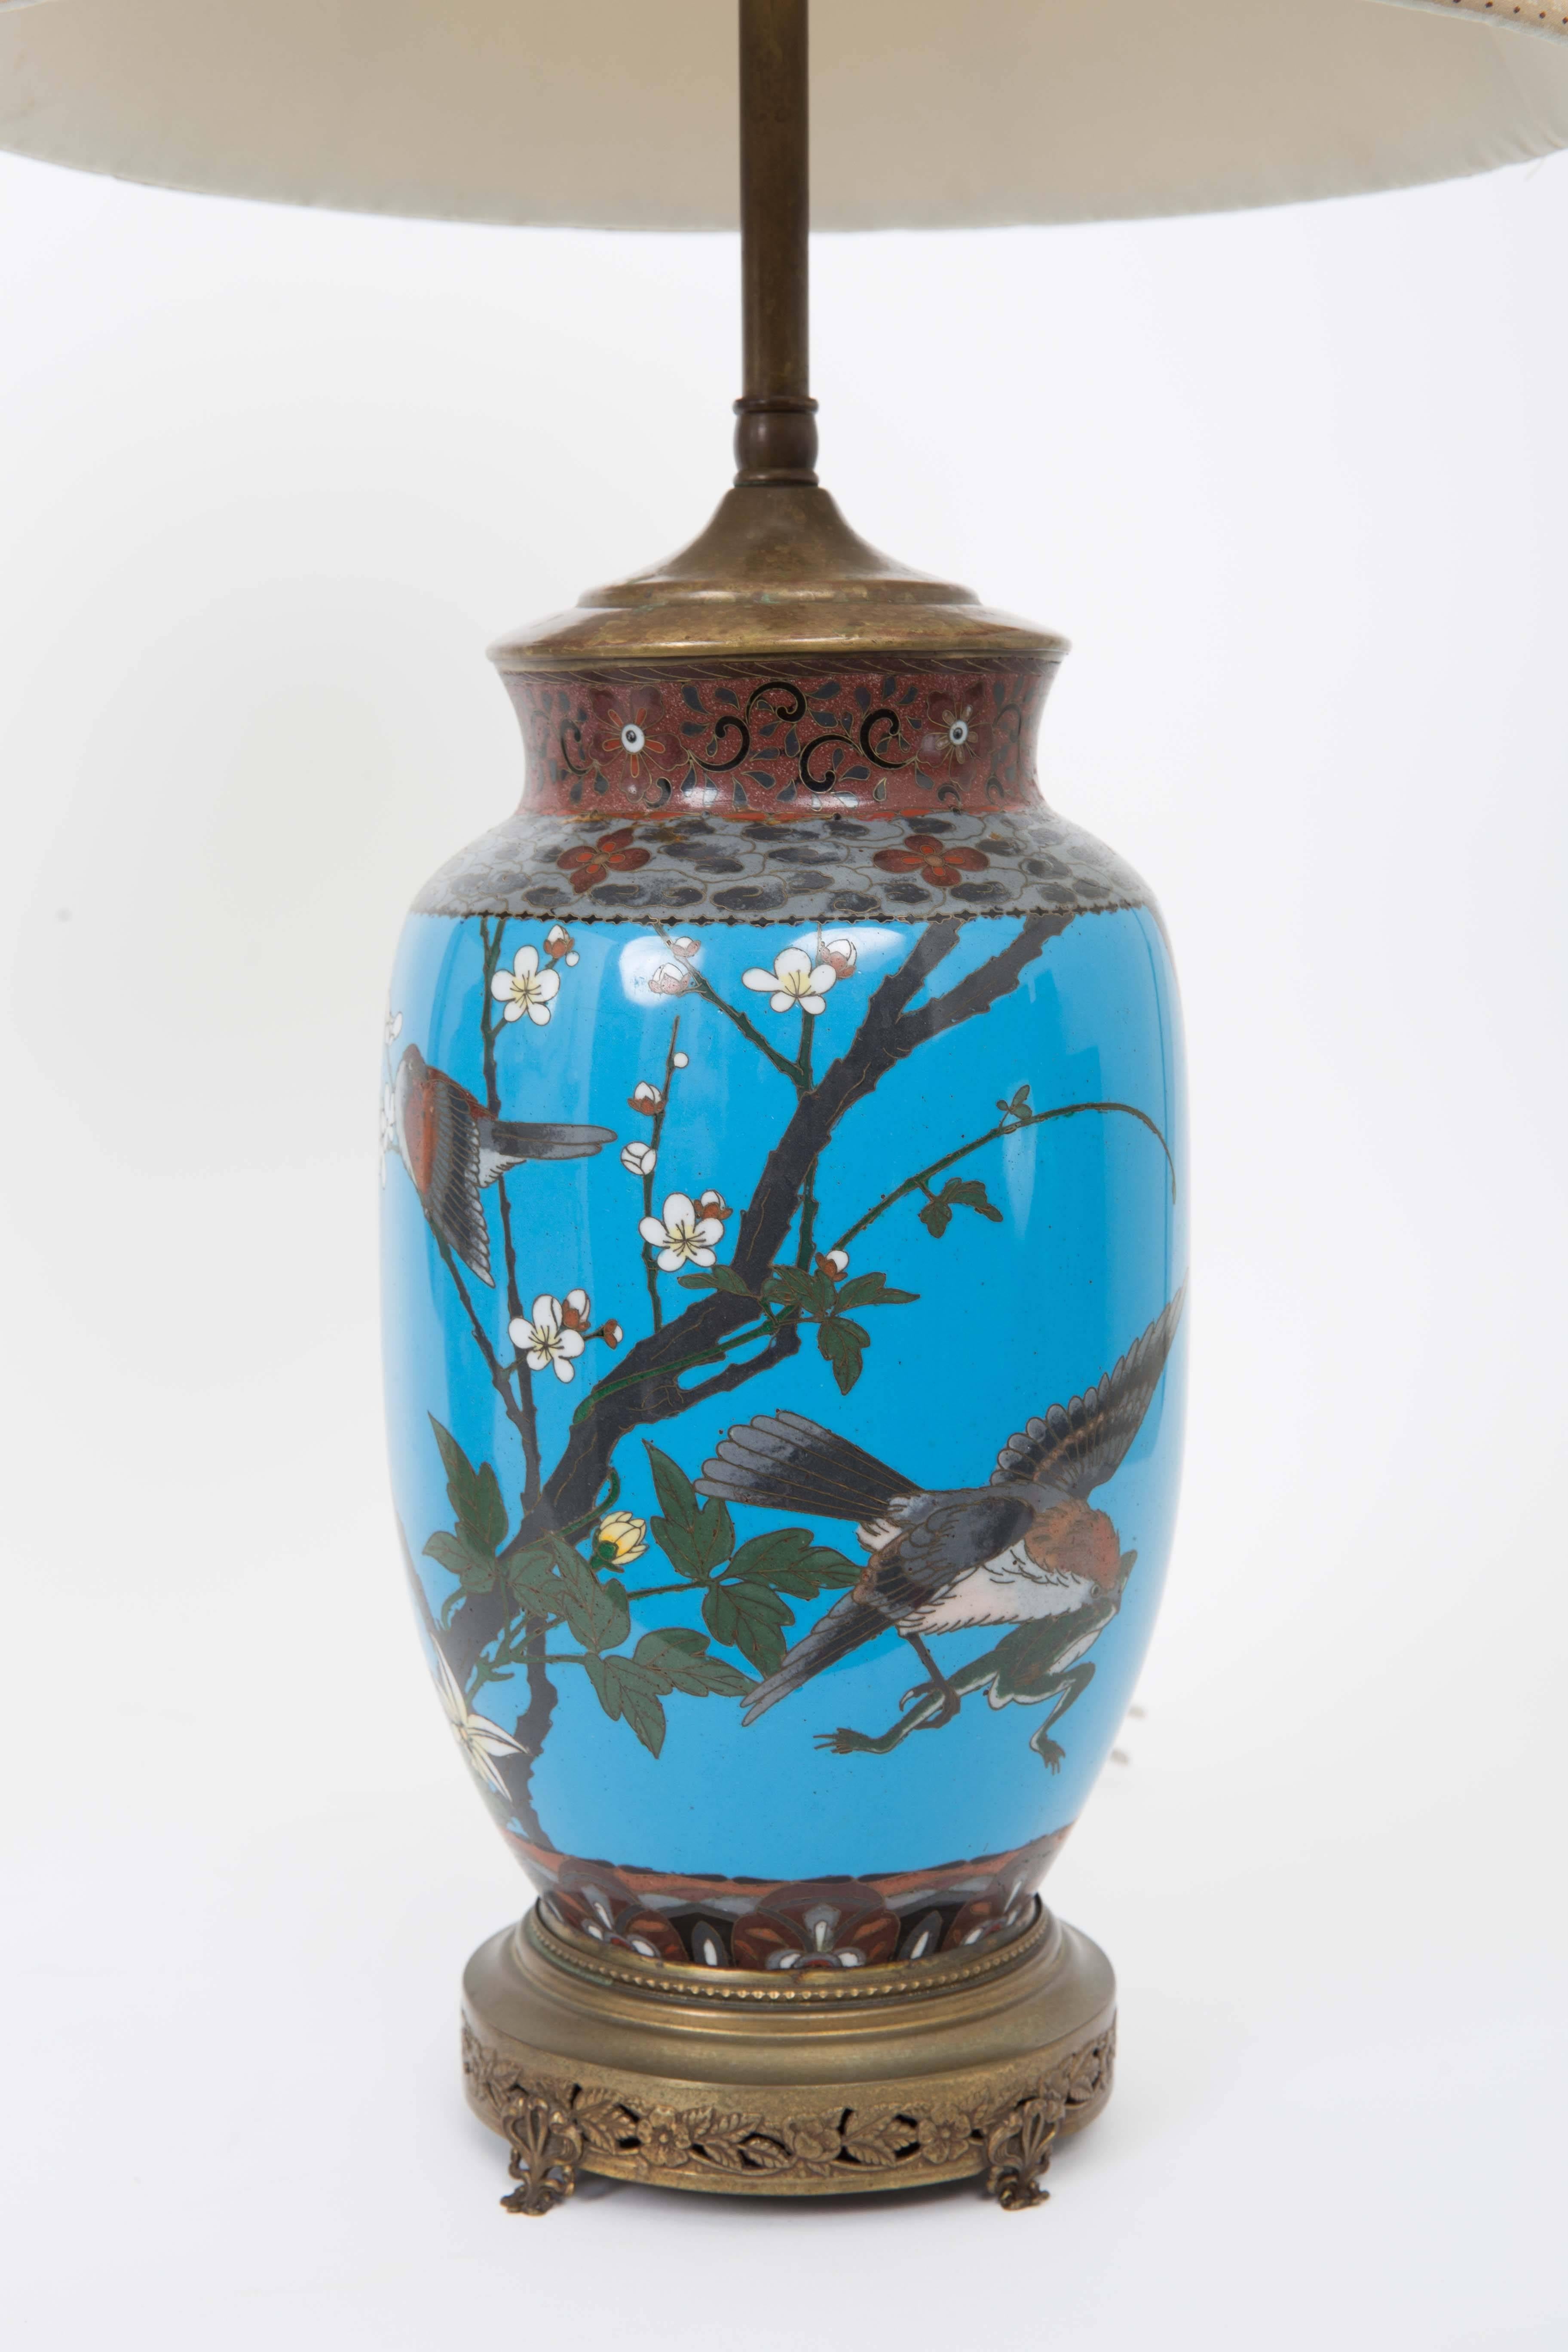 Ginger jar shape blue background with eagle and peach blossoms on one and other with song birds and cherry blossoms and branches also blue background; bordered by flowers and leaves. Brass fittings original carved stone finials.
Brass base on bow